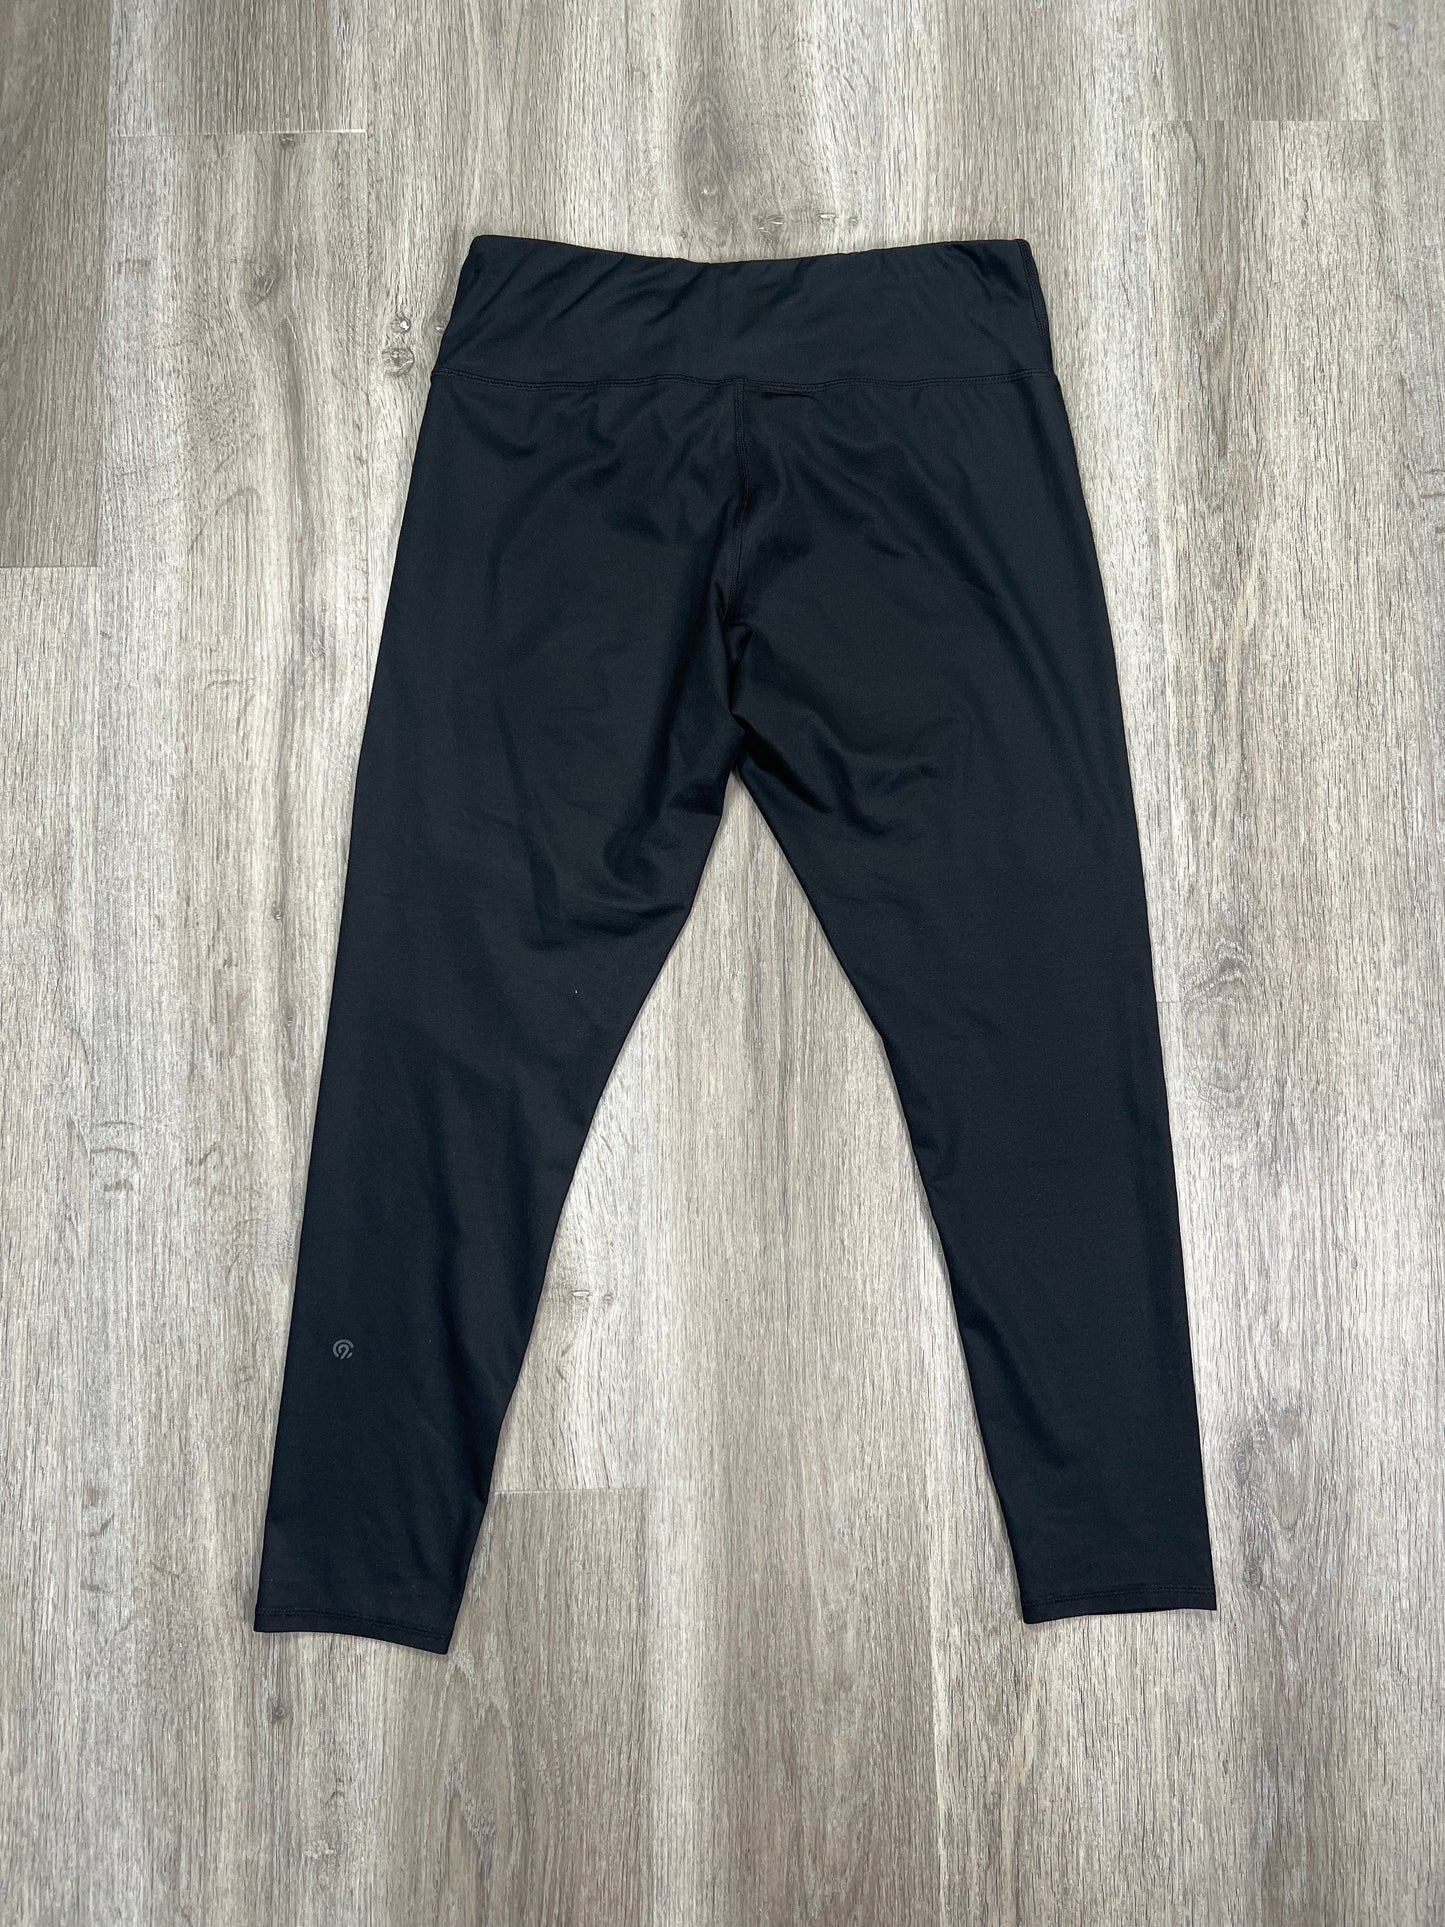 Athletic Leggings By Champion  Size: Xxl